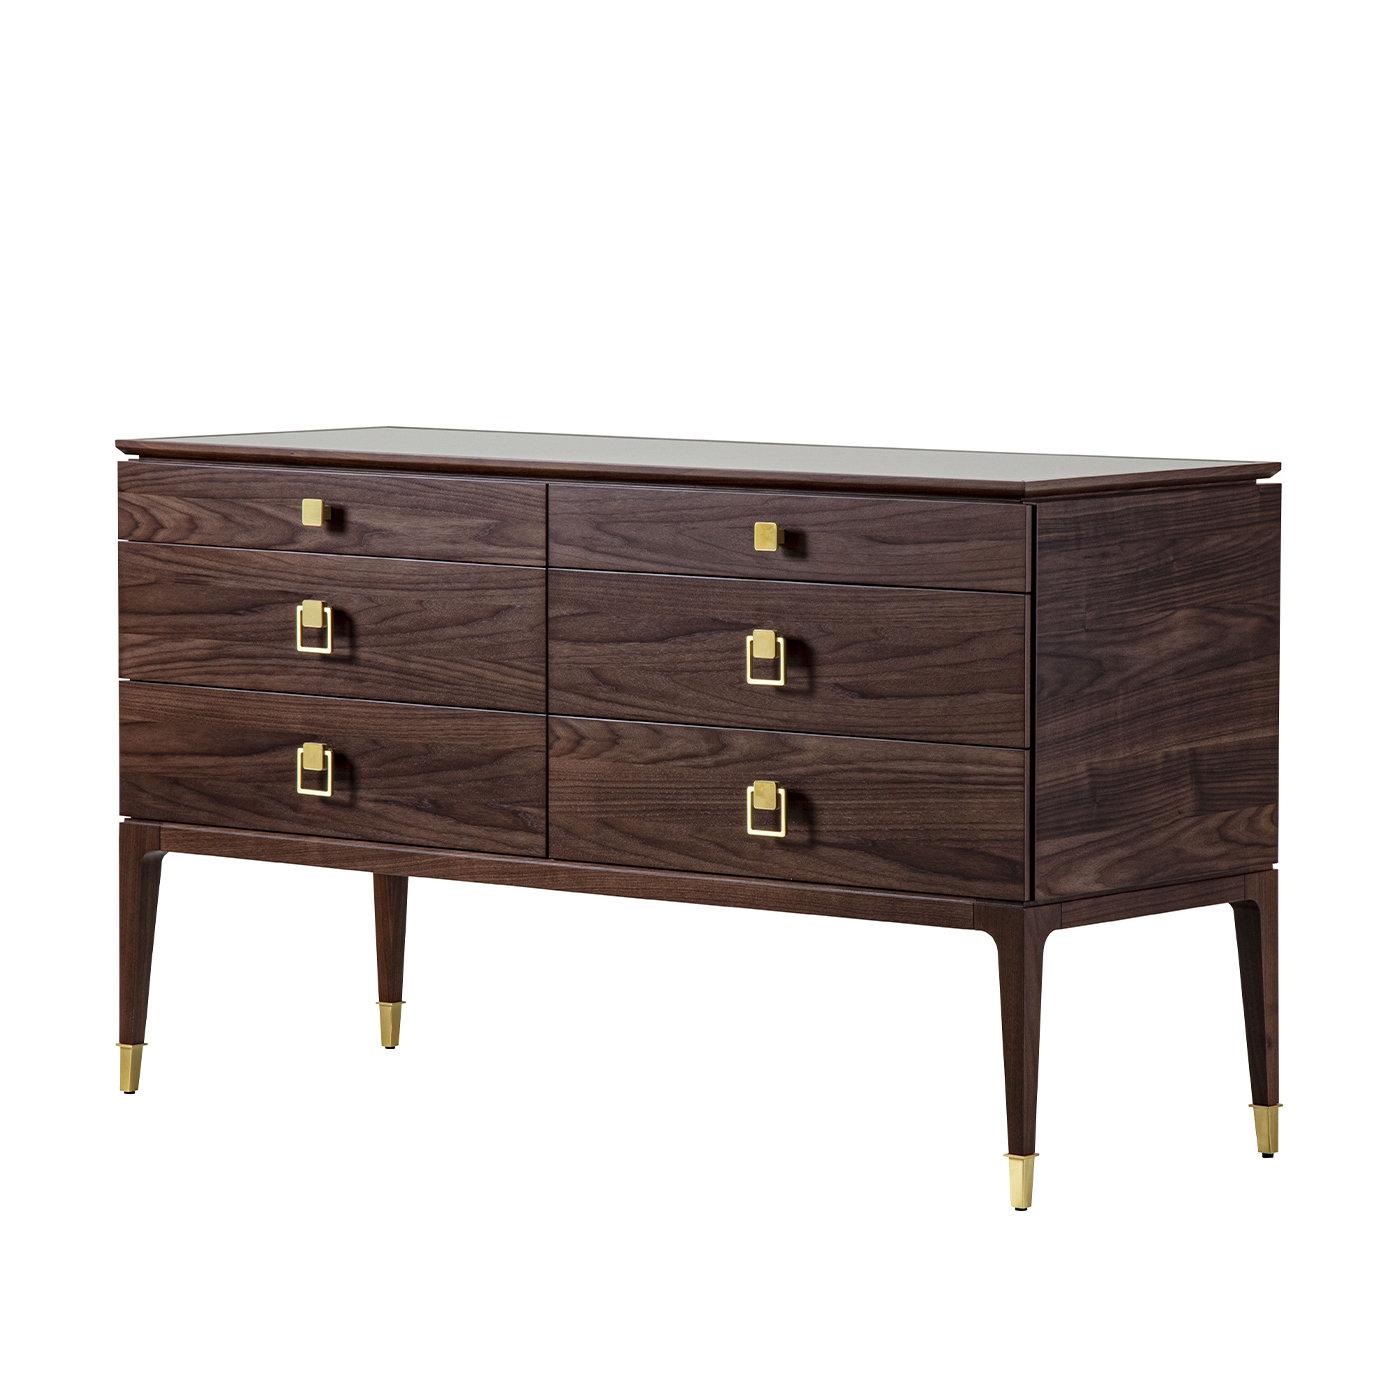 This walnut dresser finished in matt tobacco is named after the Japanese city of Nara, from which borrows a subdued architectural flair combined with Art Deco style suggestions. The storage unit comprising six drawers is raised on tapered legs